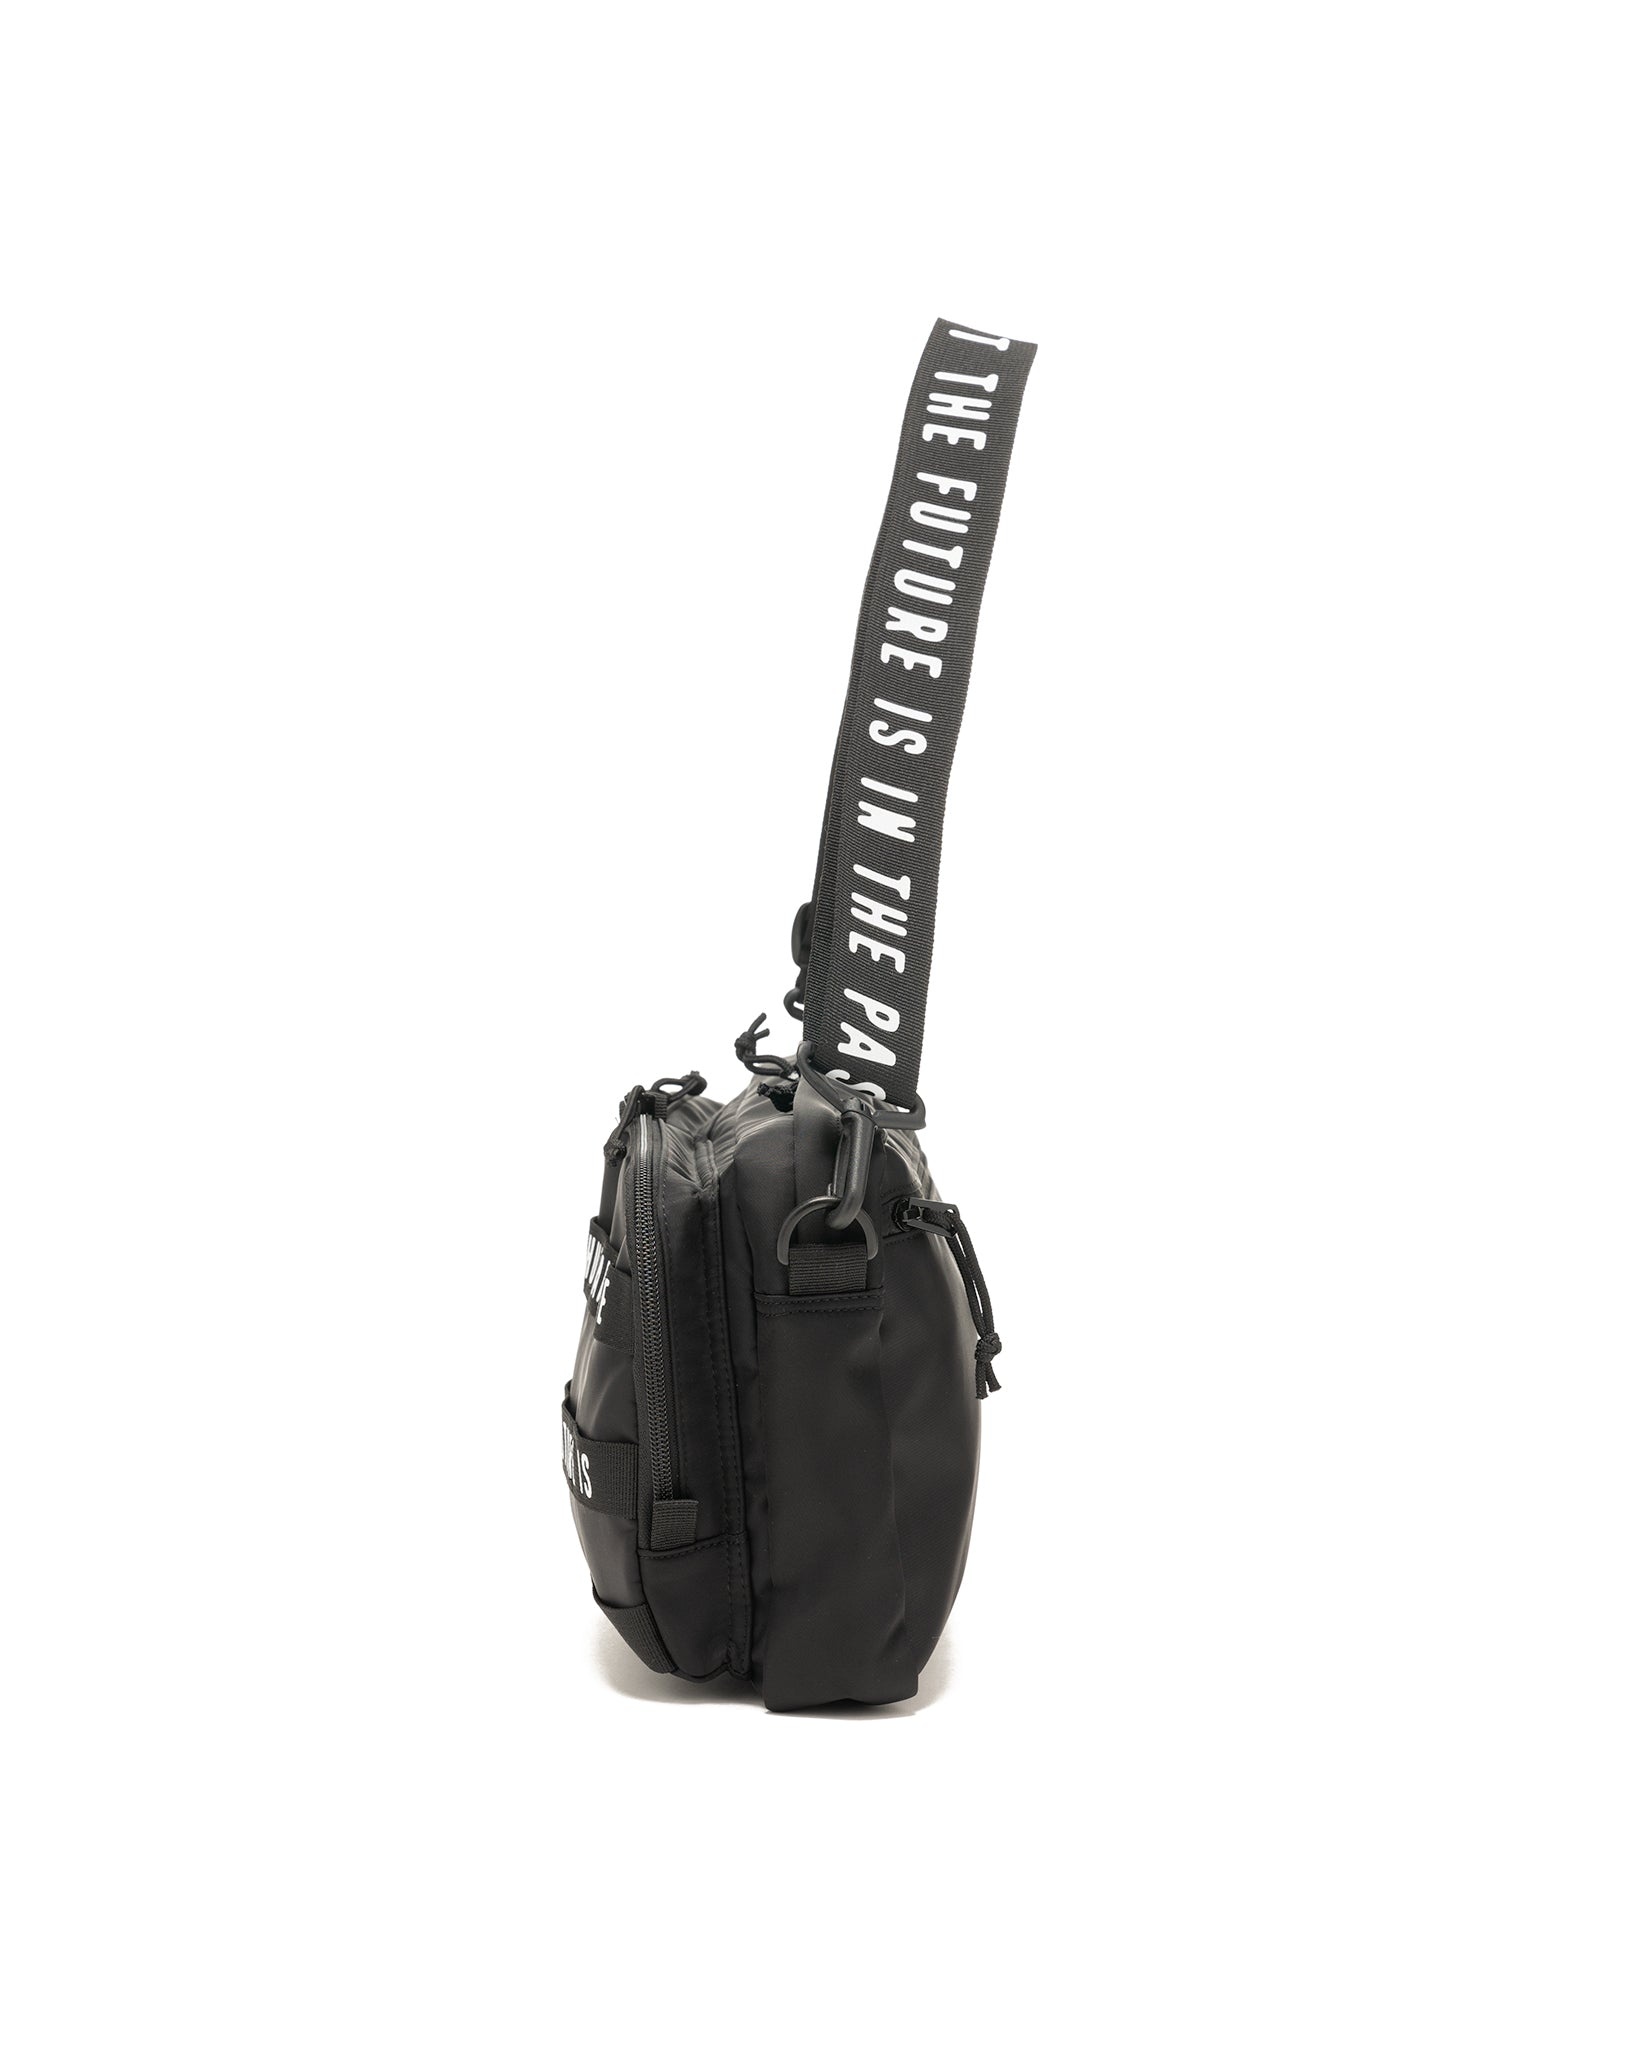 Military Pouch Large Black - 2